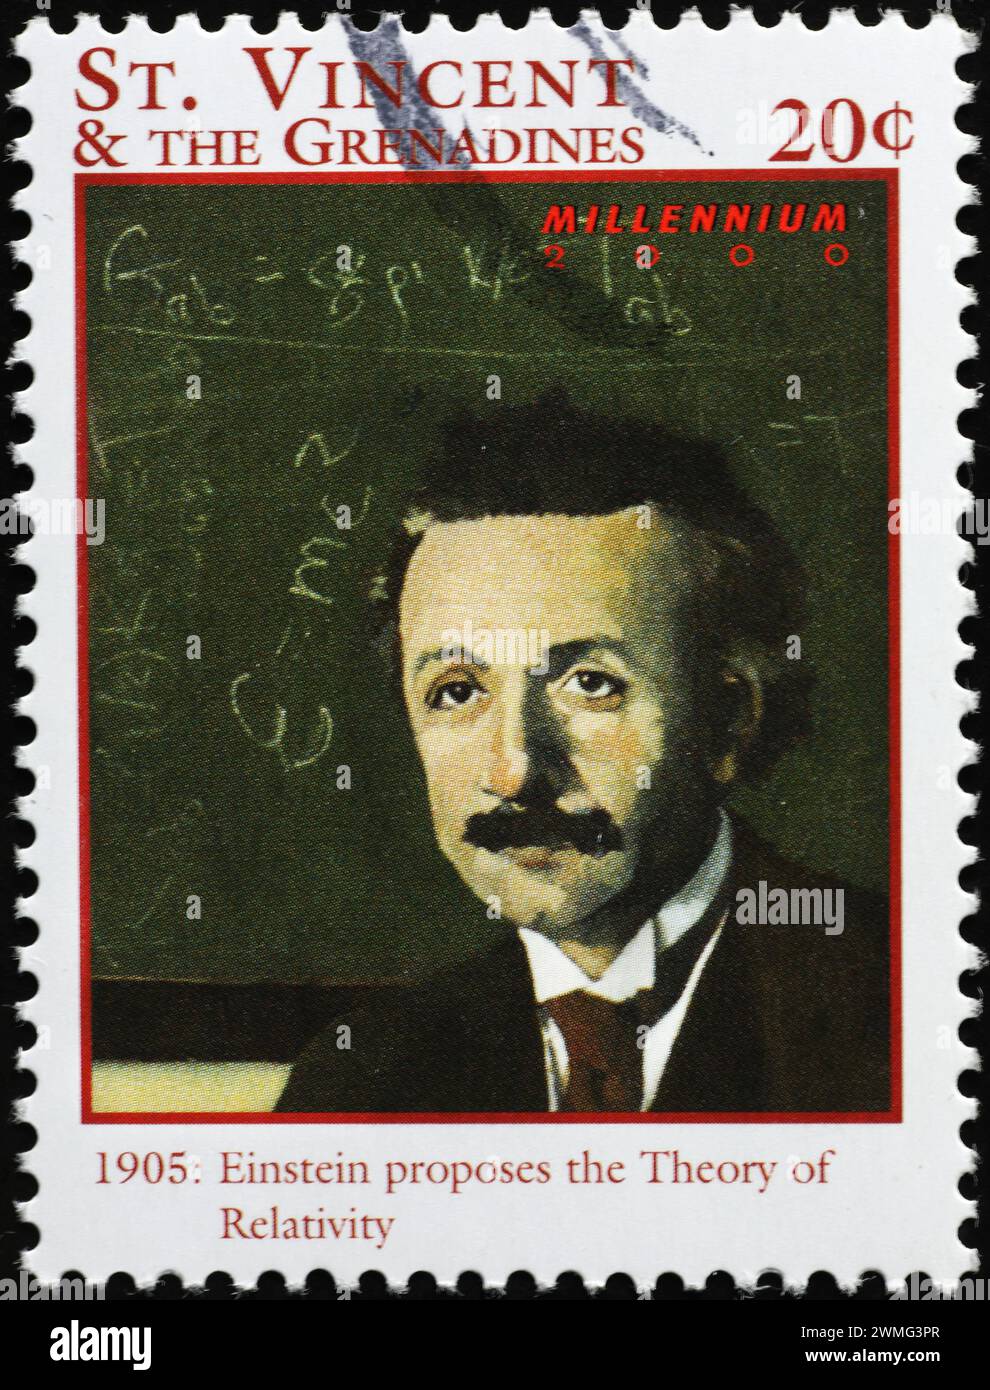 Theory of relativity of 1905 celebrated on stamp Stock Photo